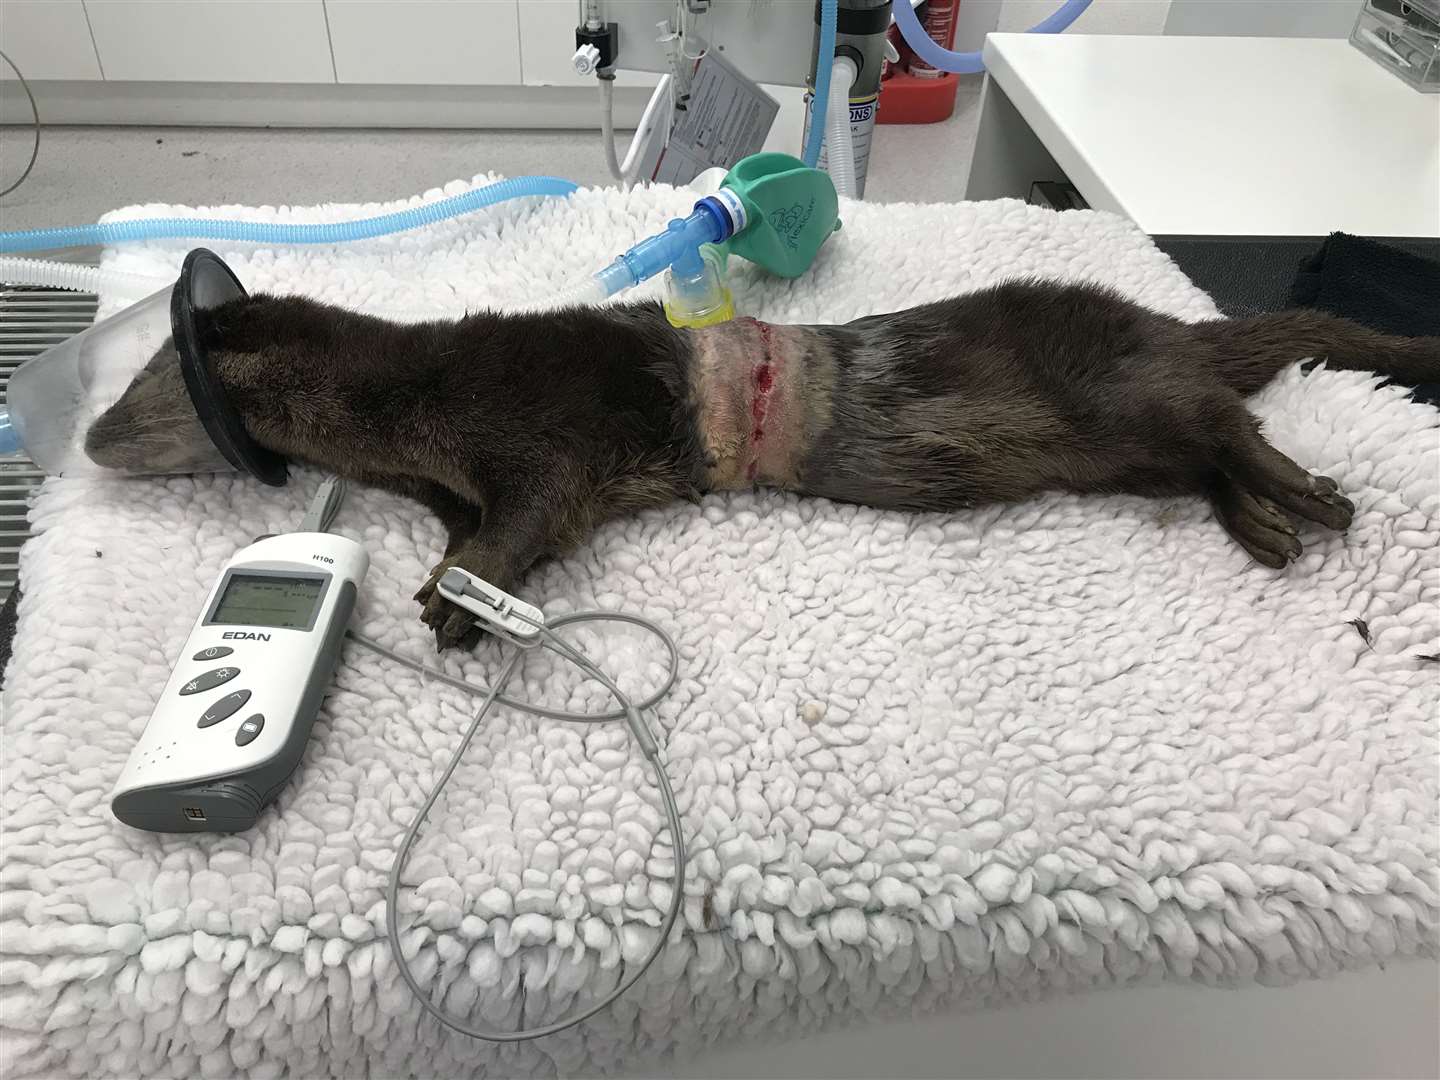 The otter suffered a serious wound (RSPCA/PA)